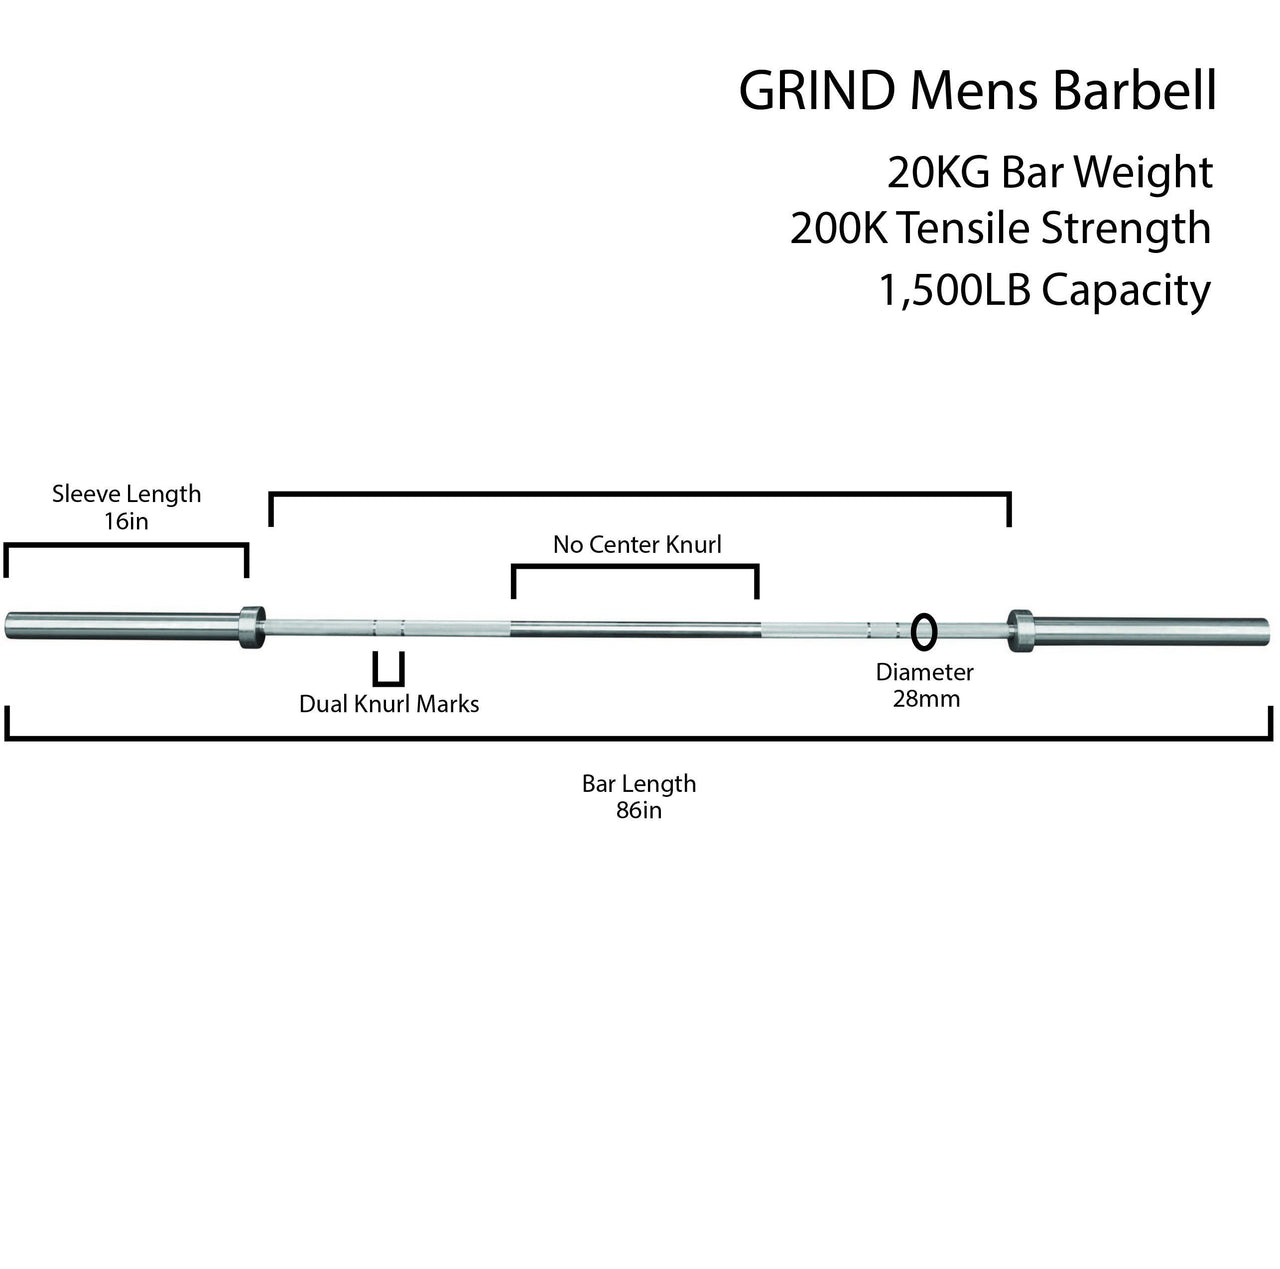 Dimensions of The GRIND Fitness Men's Bright Chrome Bar